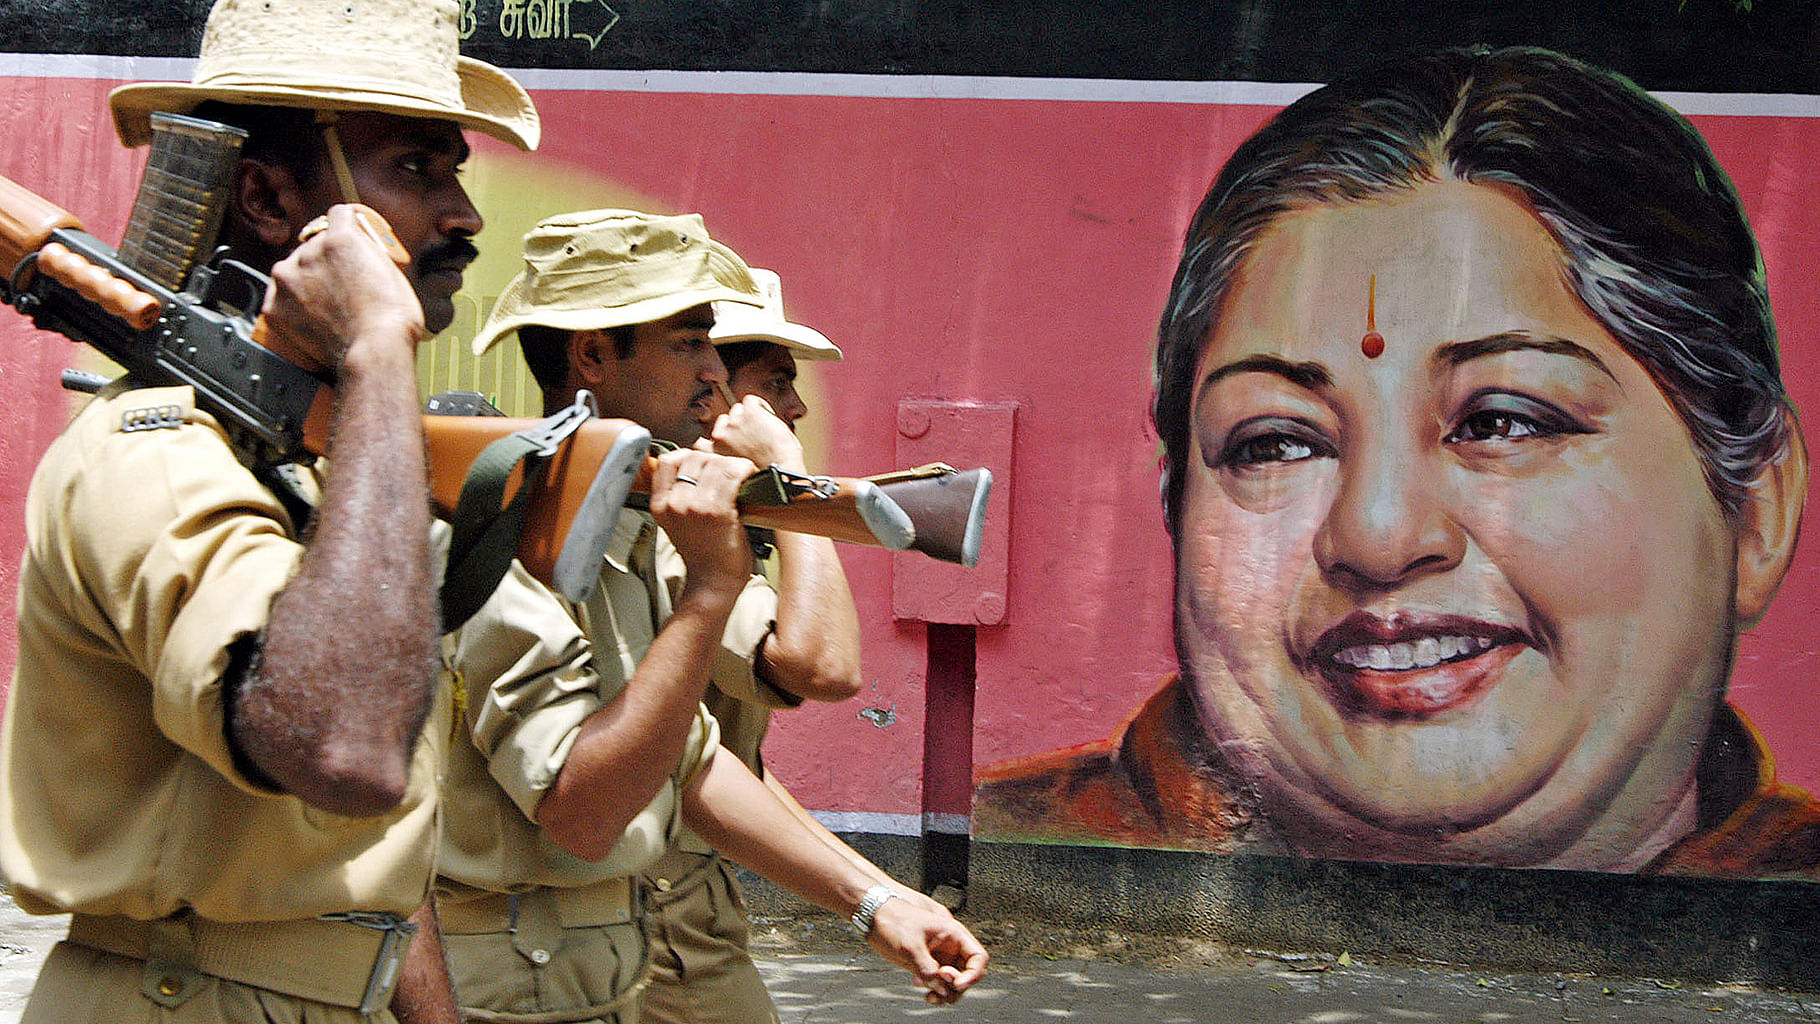 Chennai police officers are seen here, with a poster of Chief Minister of Tamil Nadu, J Jayalalitha, in the background. (Photo: Reuters) &nbsp;    